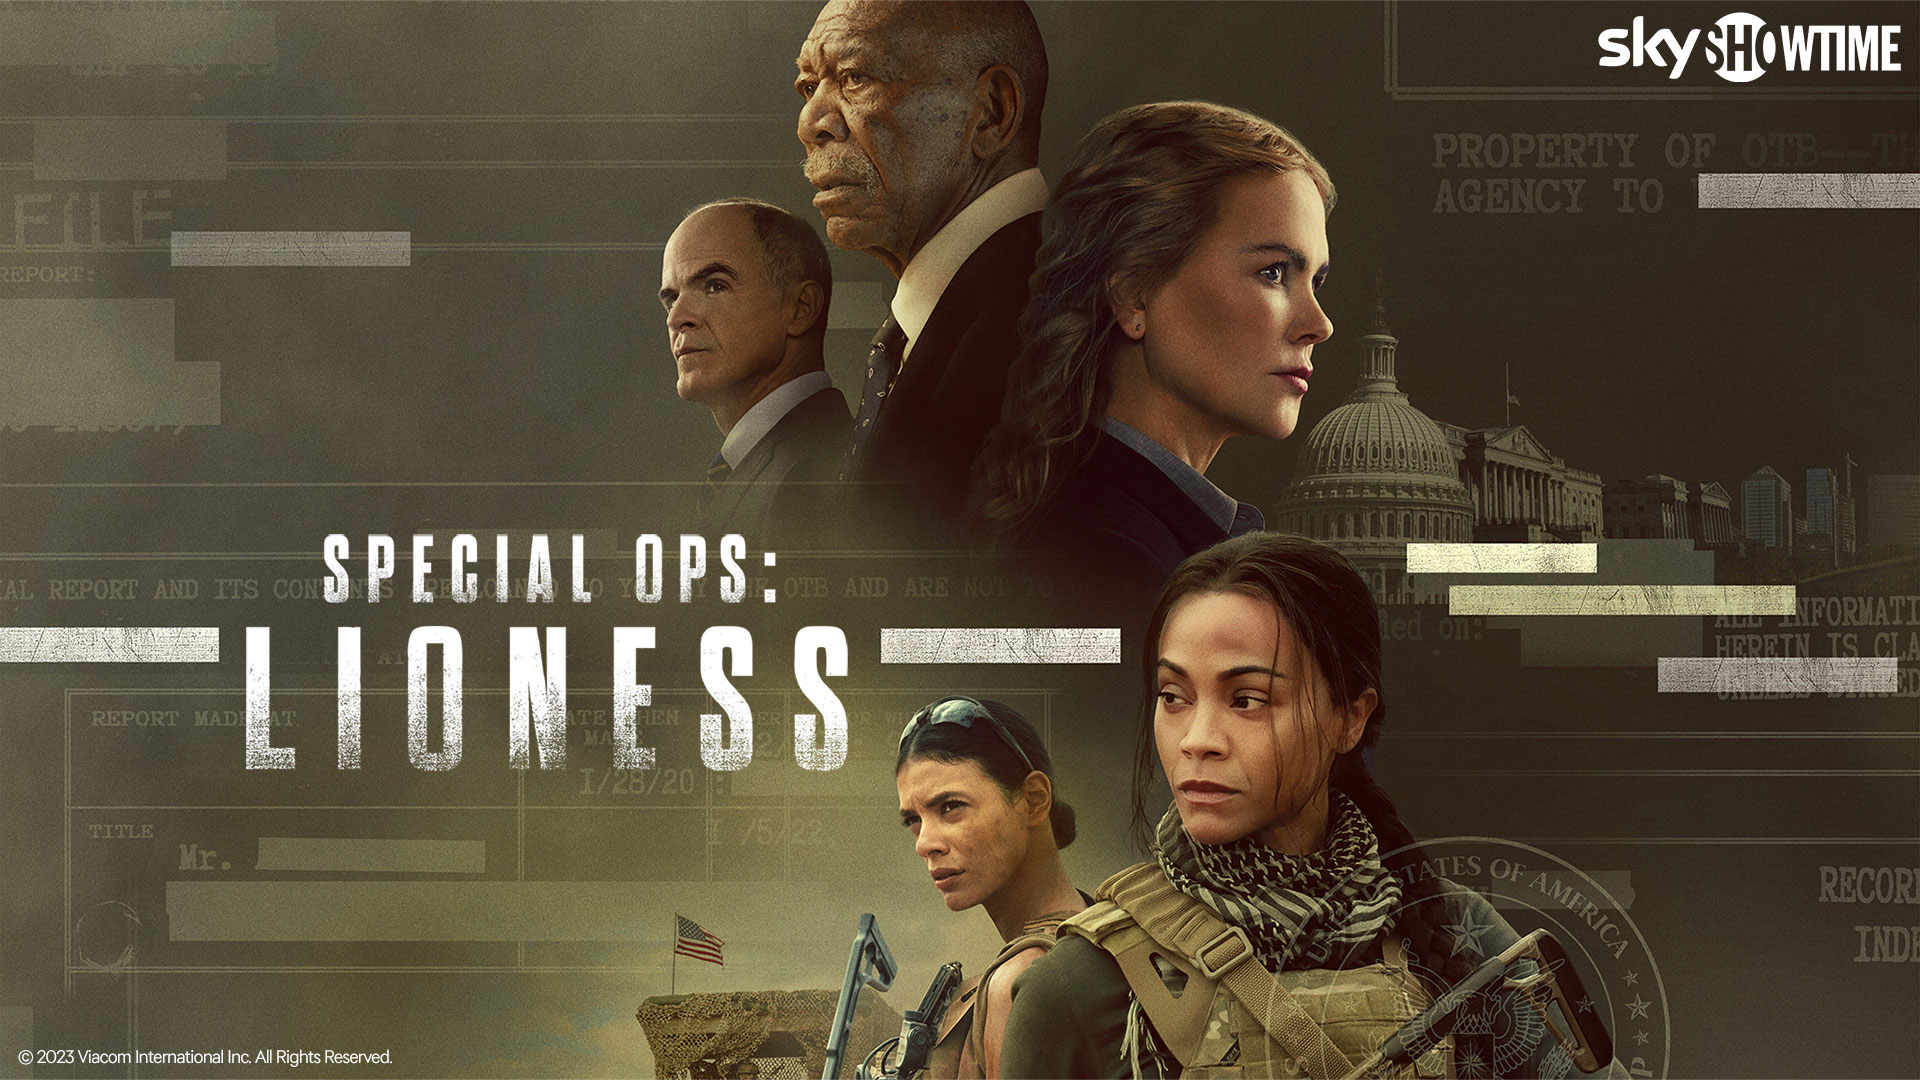 Special Ops: Lioness Key Art 1920x1080 Branded